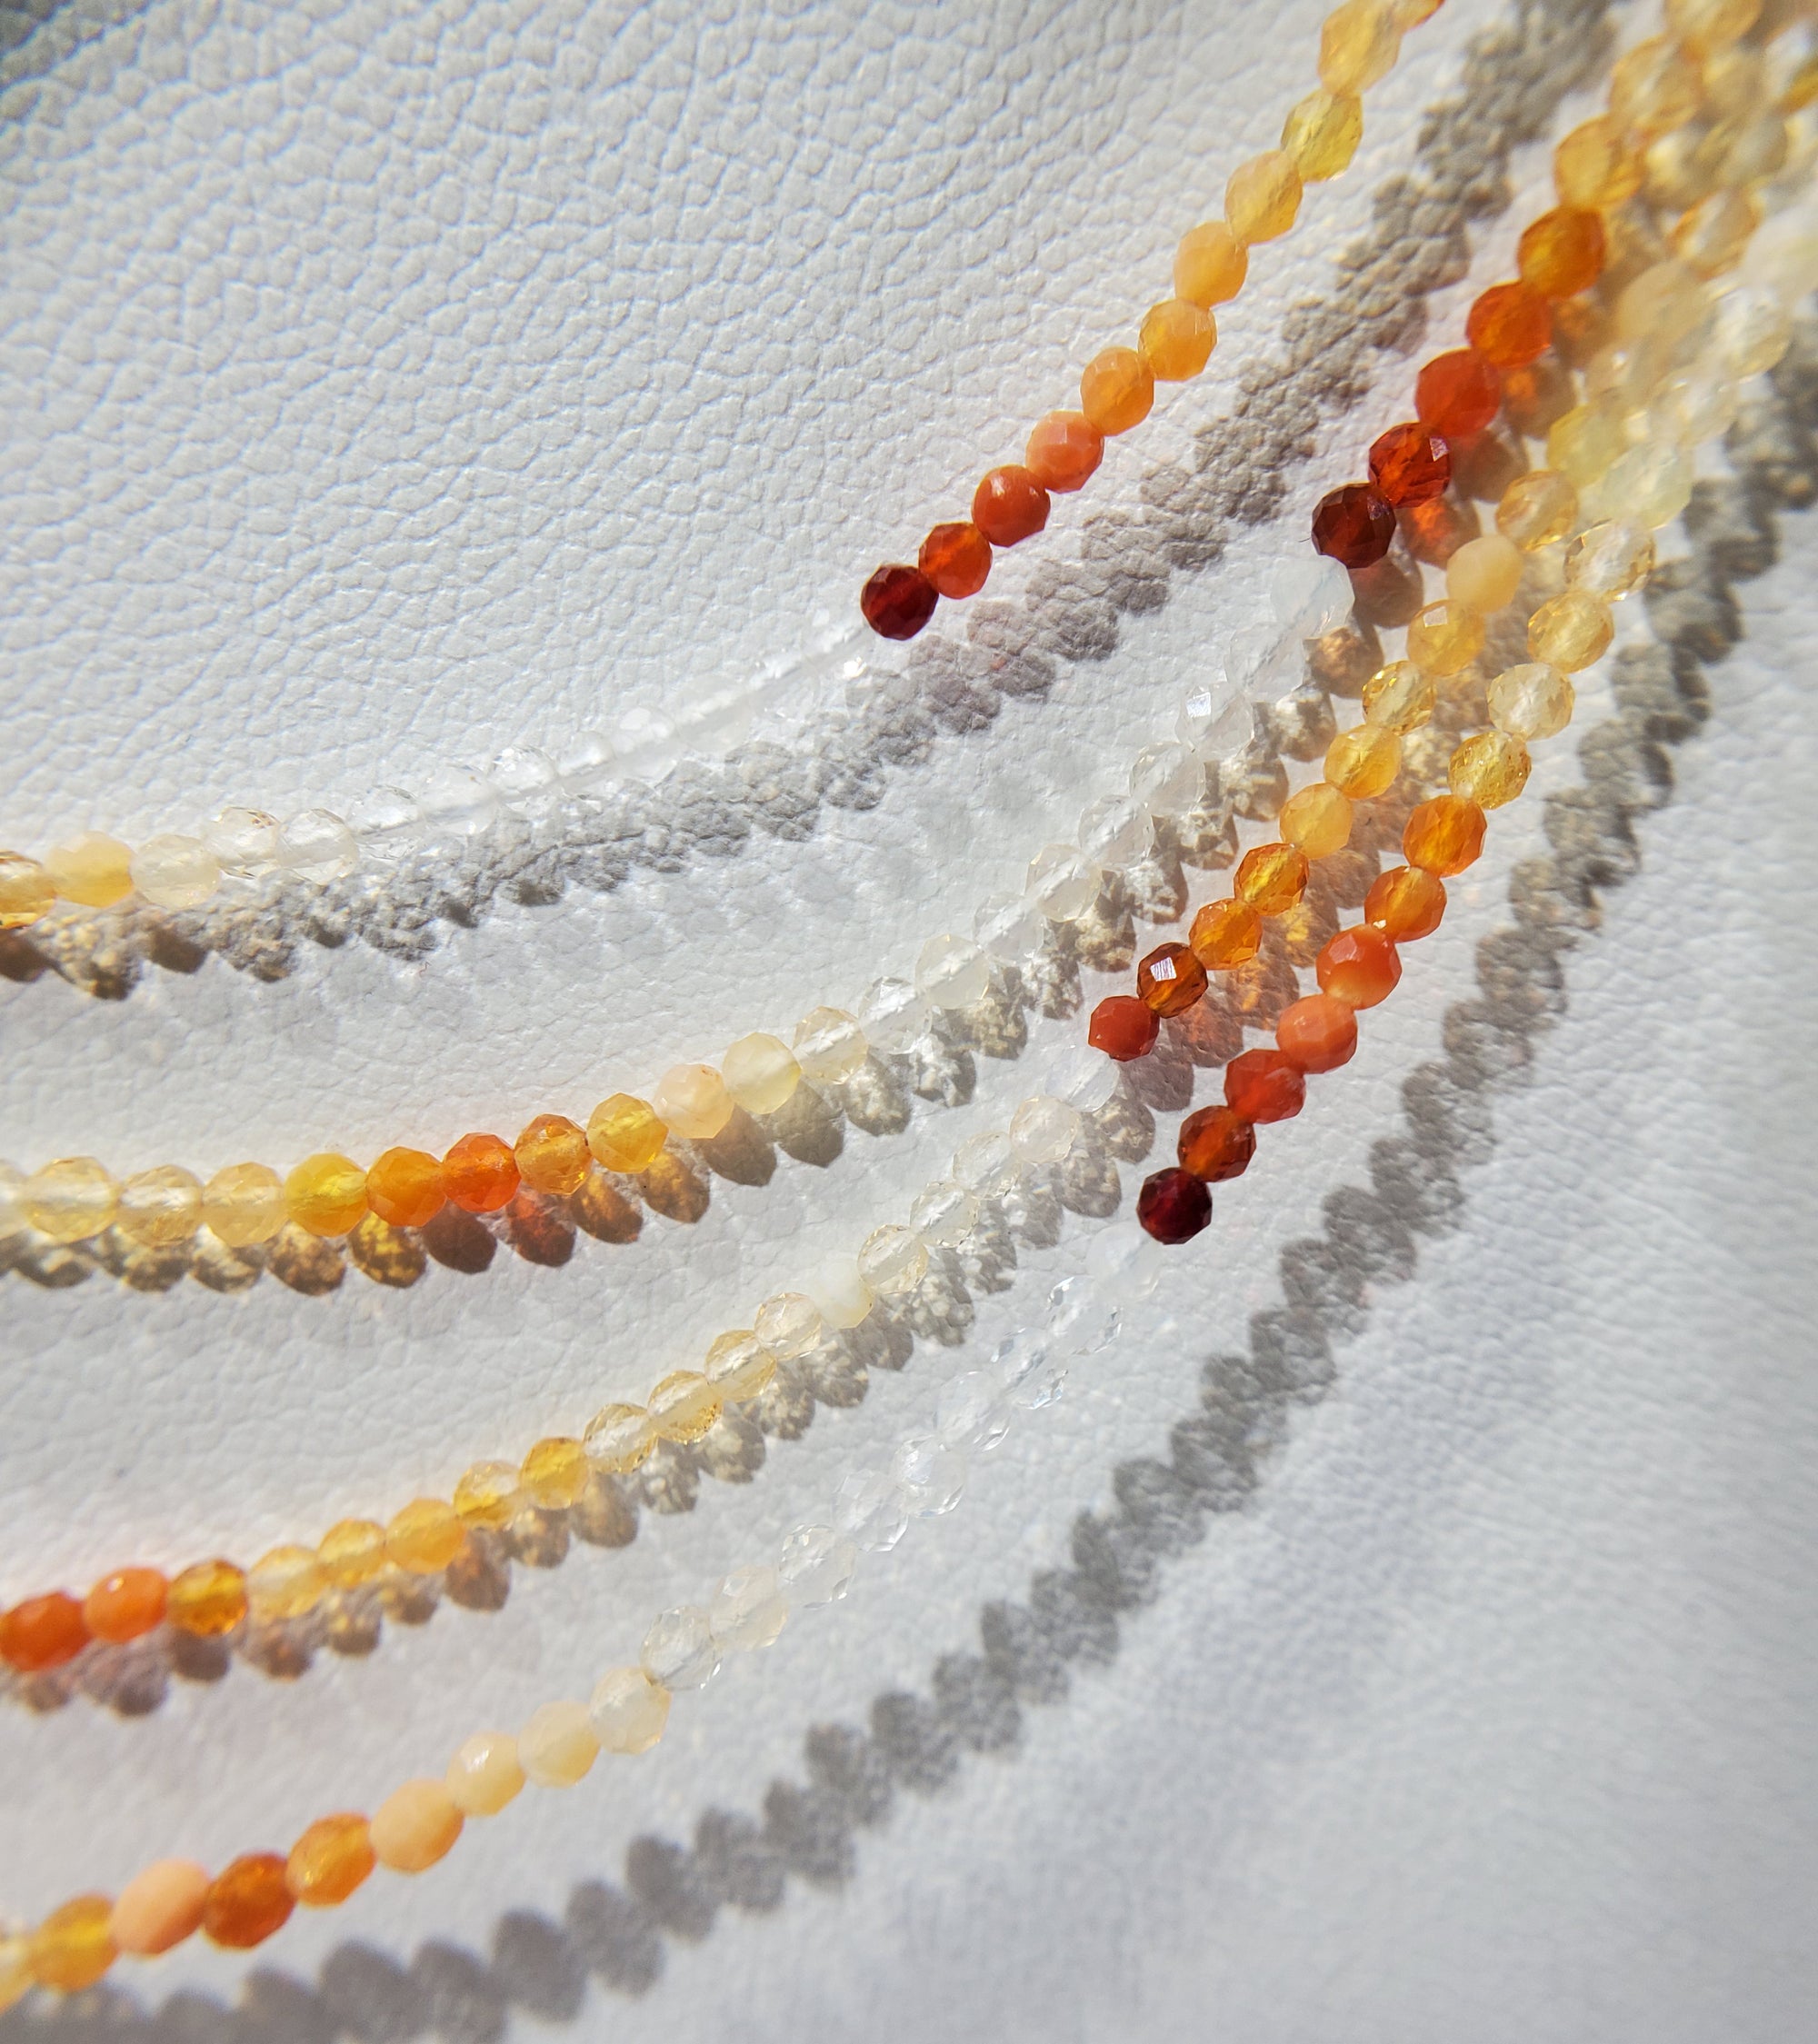 Faceted Fire Opal Bead Necklace